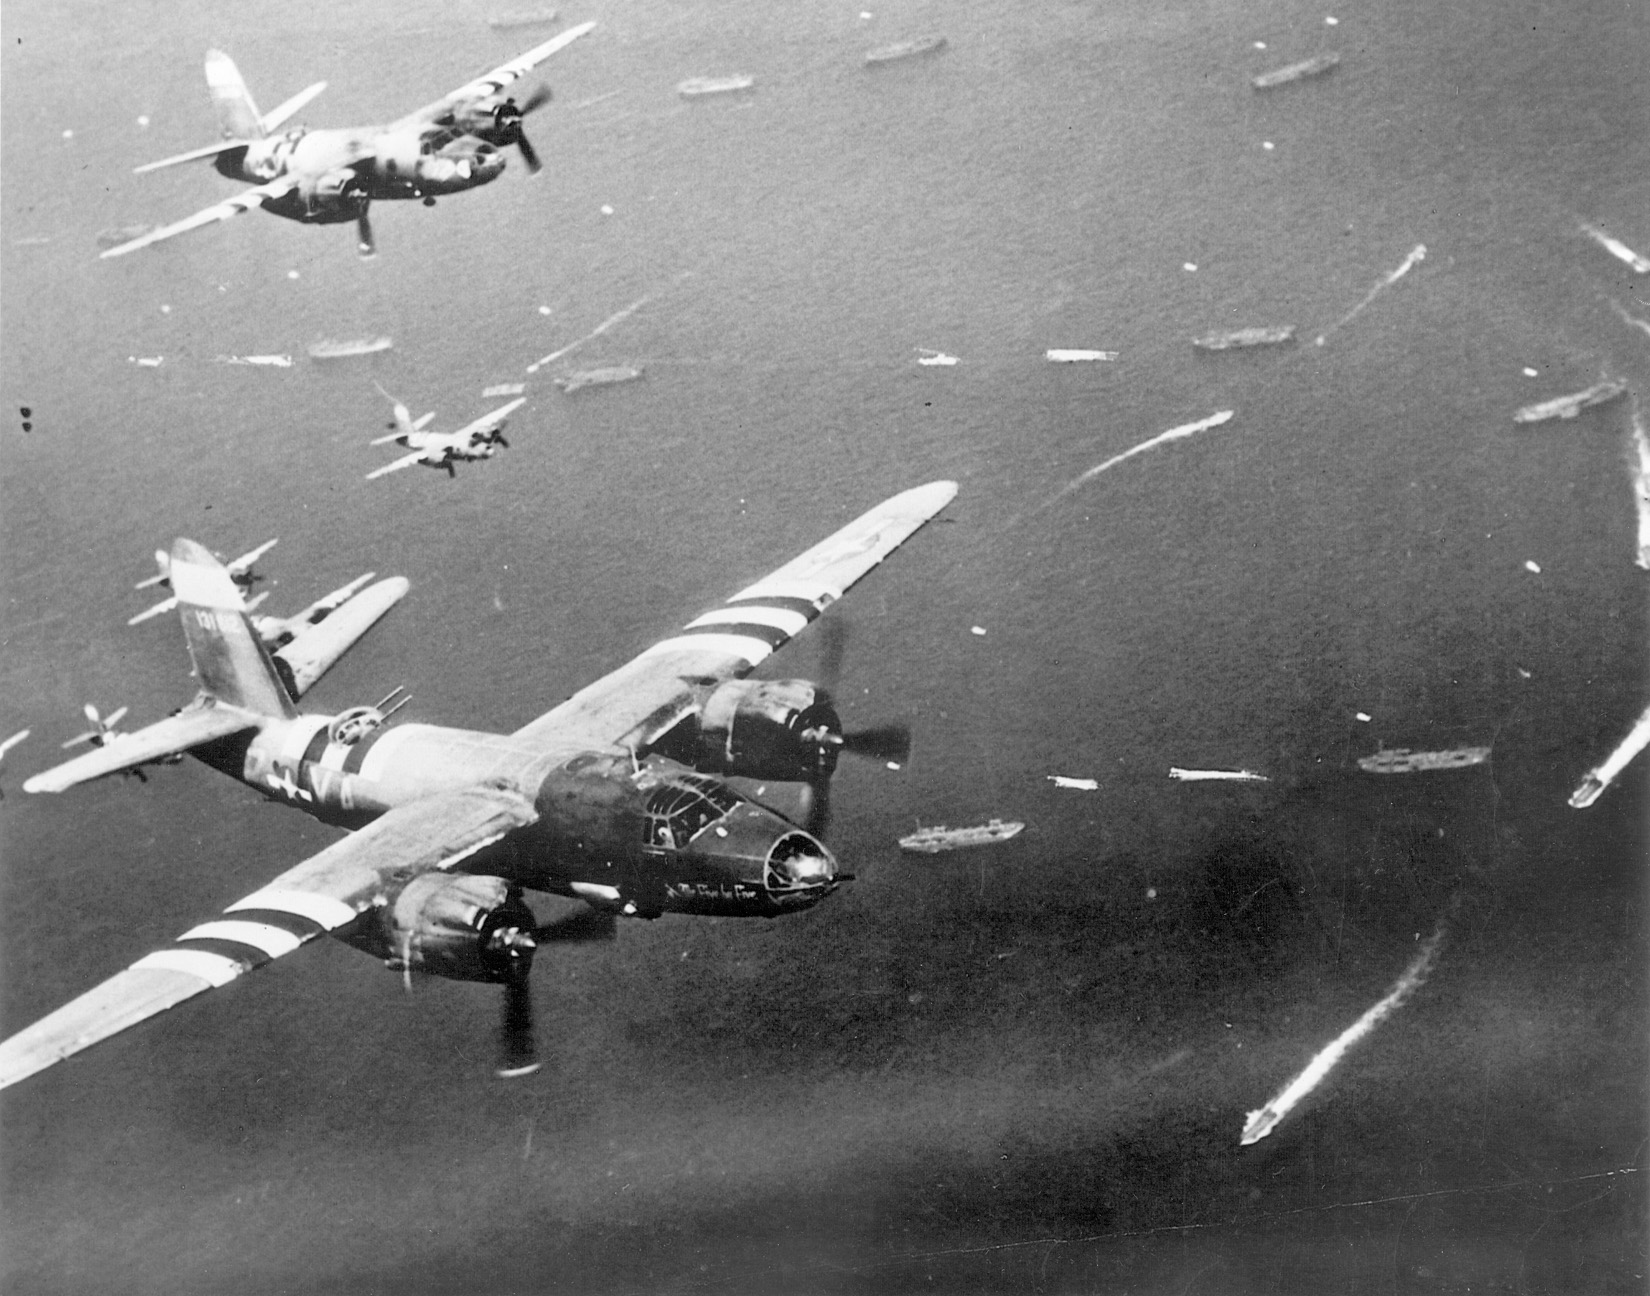 Painted with black and white recognition stripes for the D-day invasion, twin-engined Martin B-26 bombers head toward targets in France. Ships of the Allied invasion force mill about in the English Channel below.